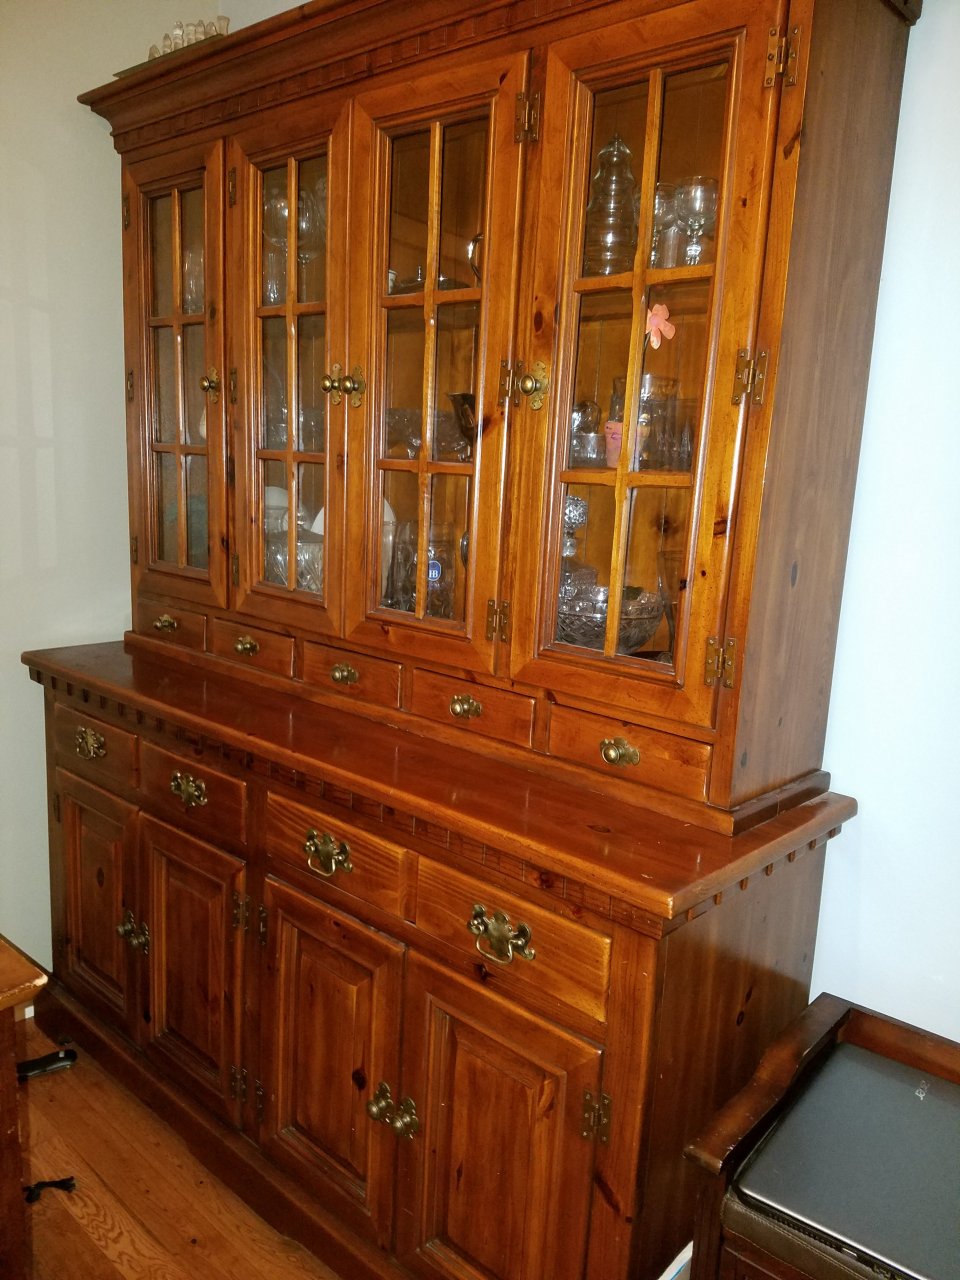 Link-Taylor China Hutch | My Antique Furniture Collection